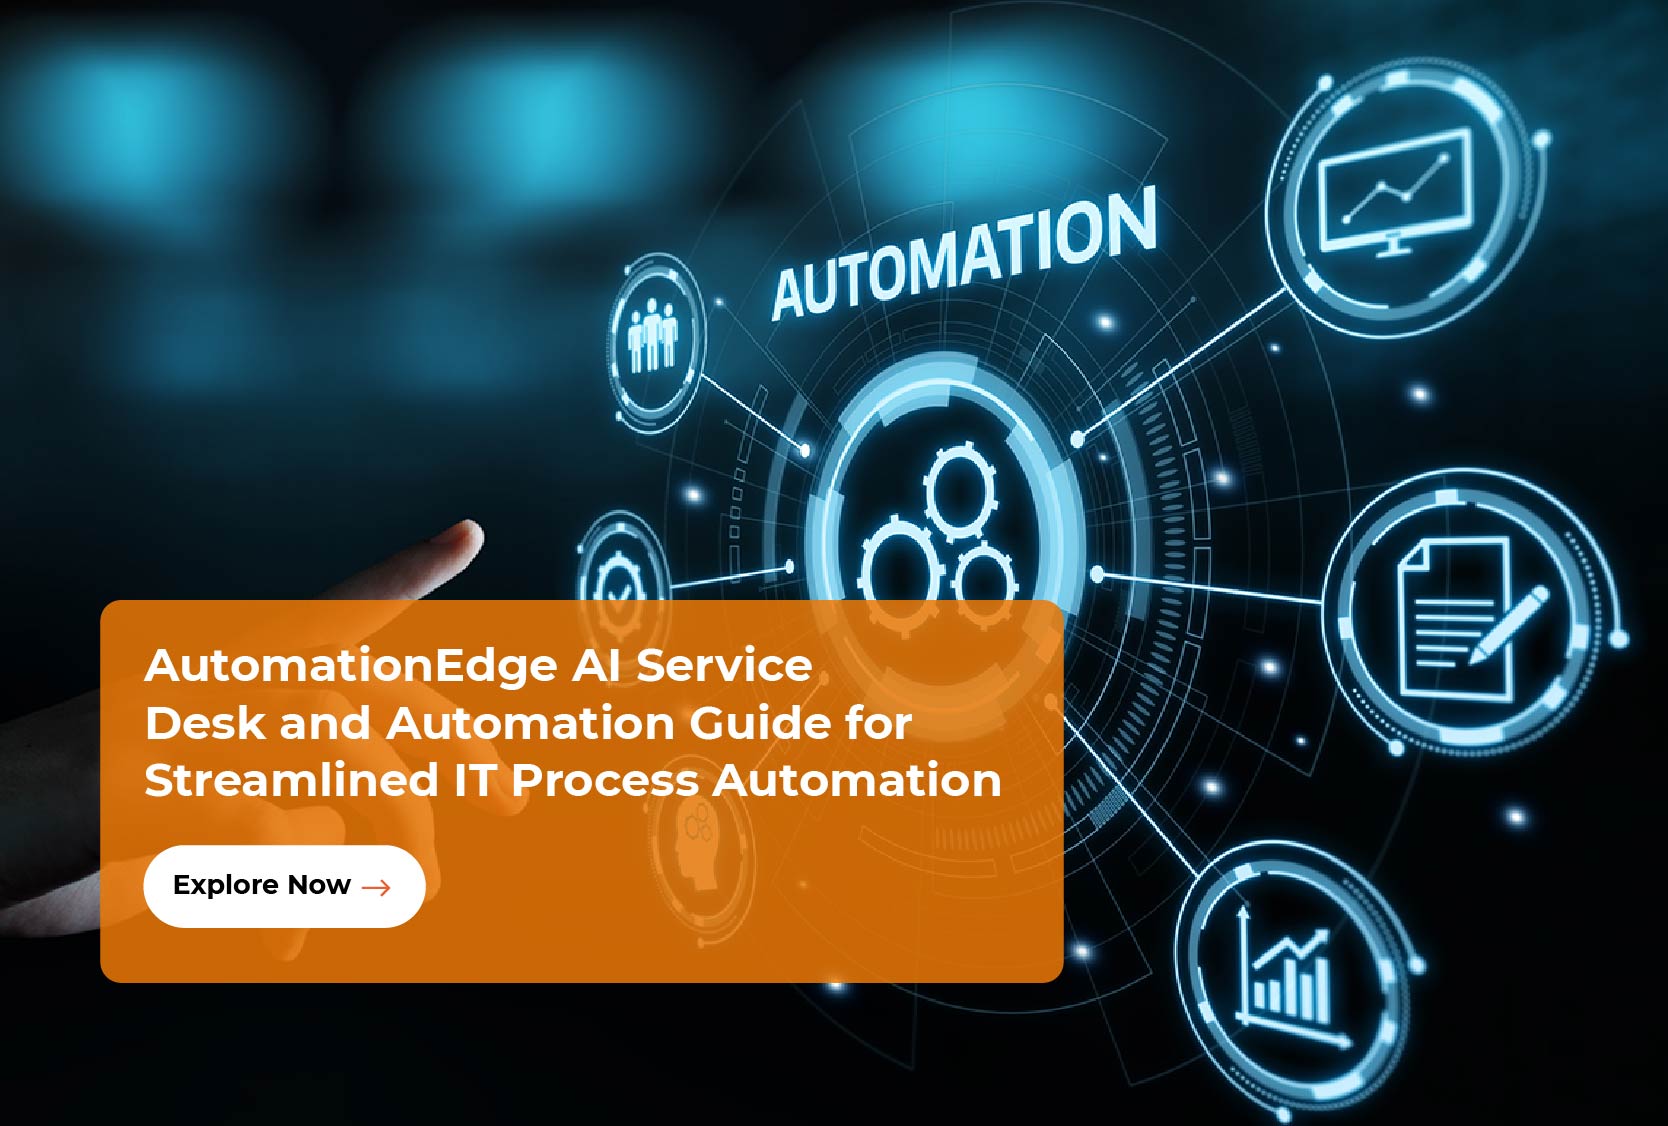 AutomationEdge AI Service Desk and Automation Guide for Streamlined IT Process Automation